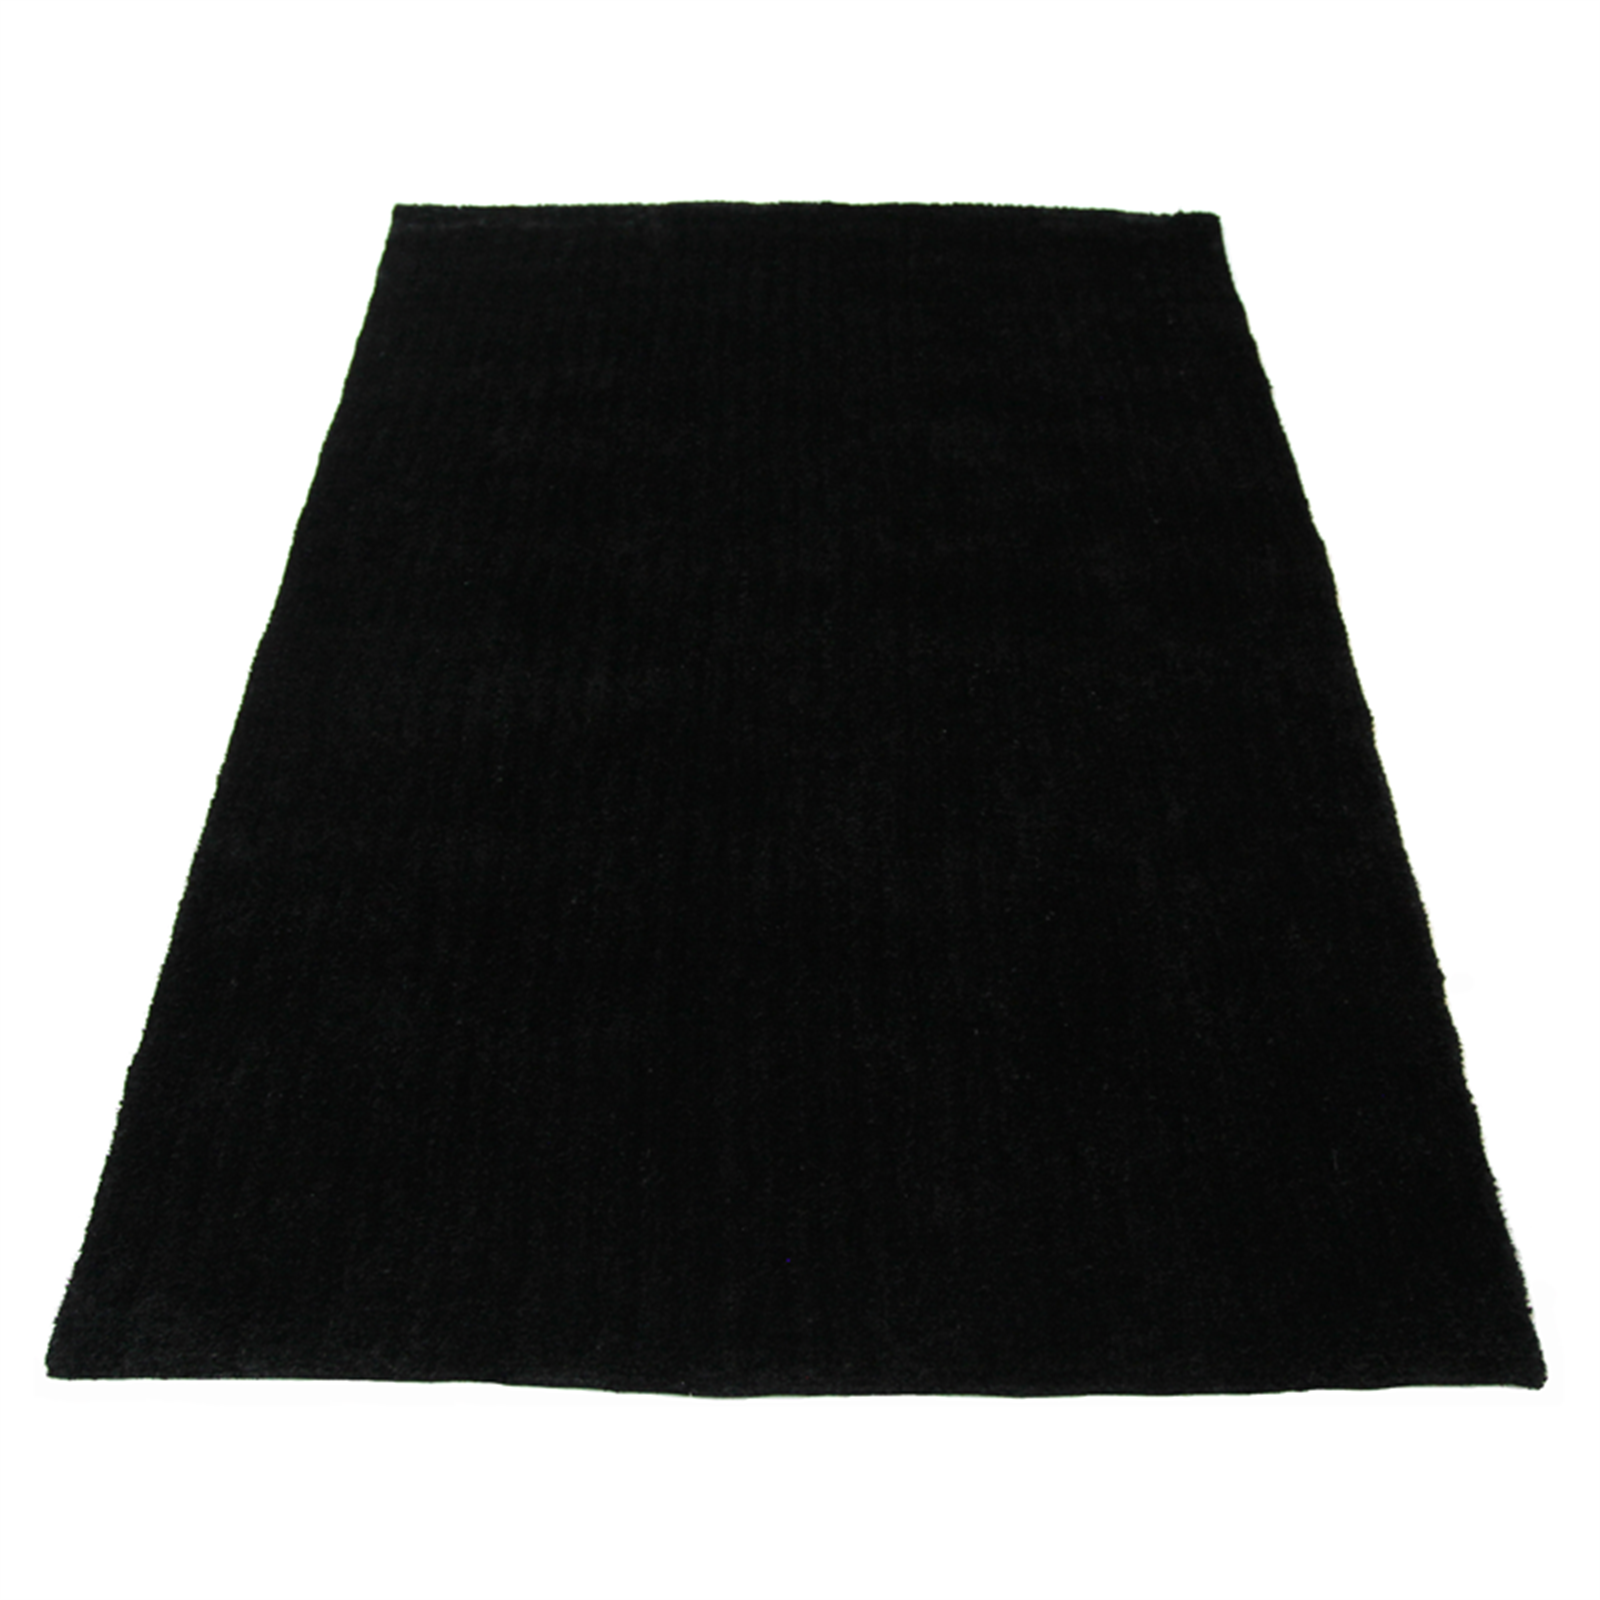 The Estate Collection 160 x 230cm Black Berlin Rug